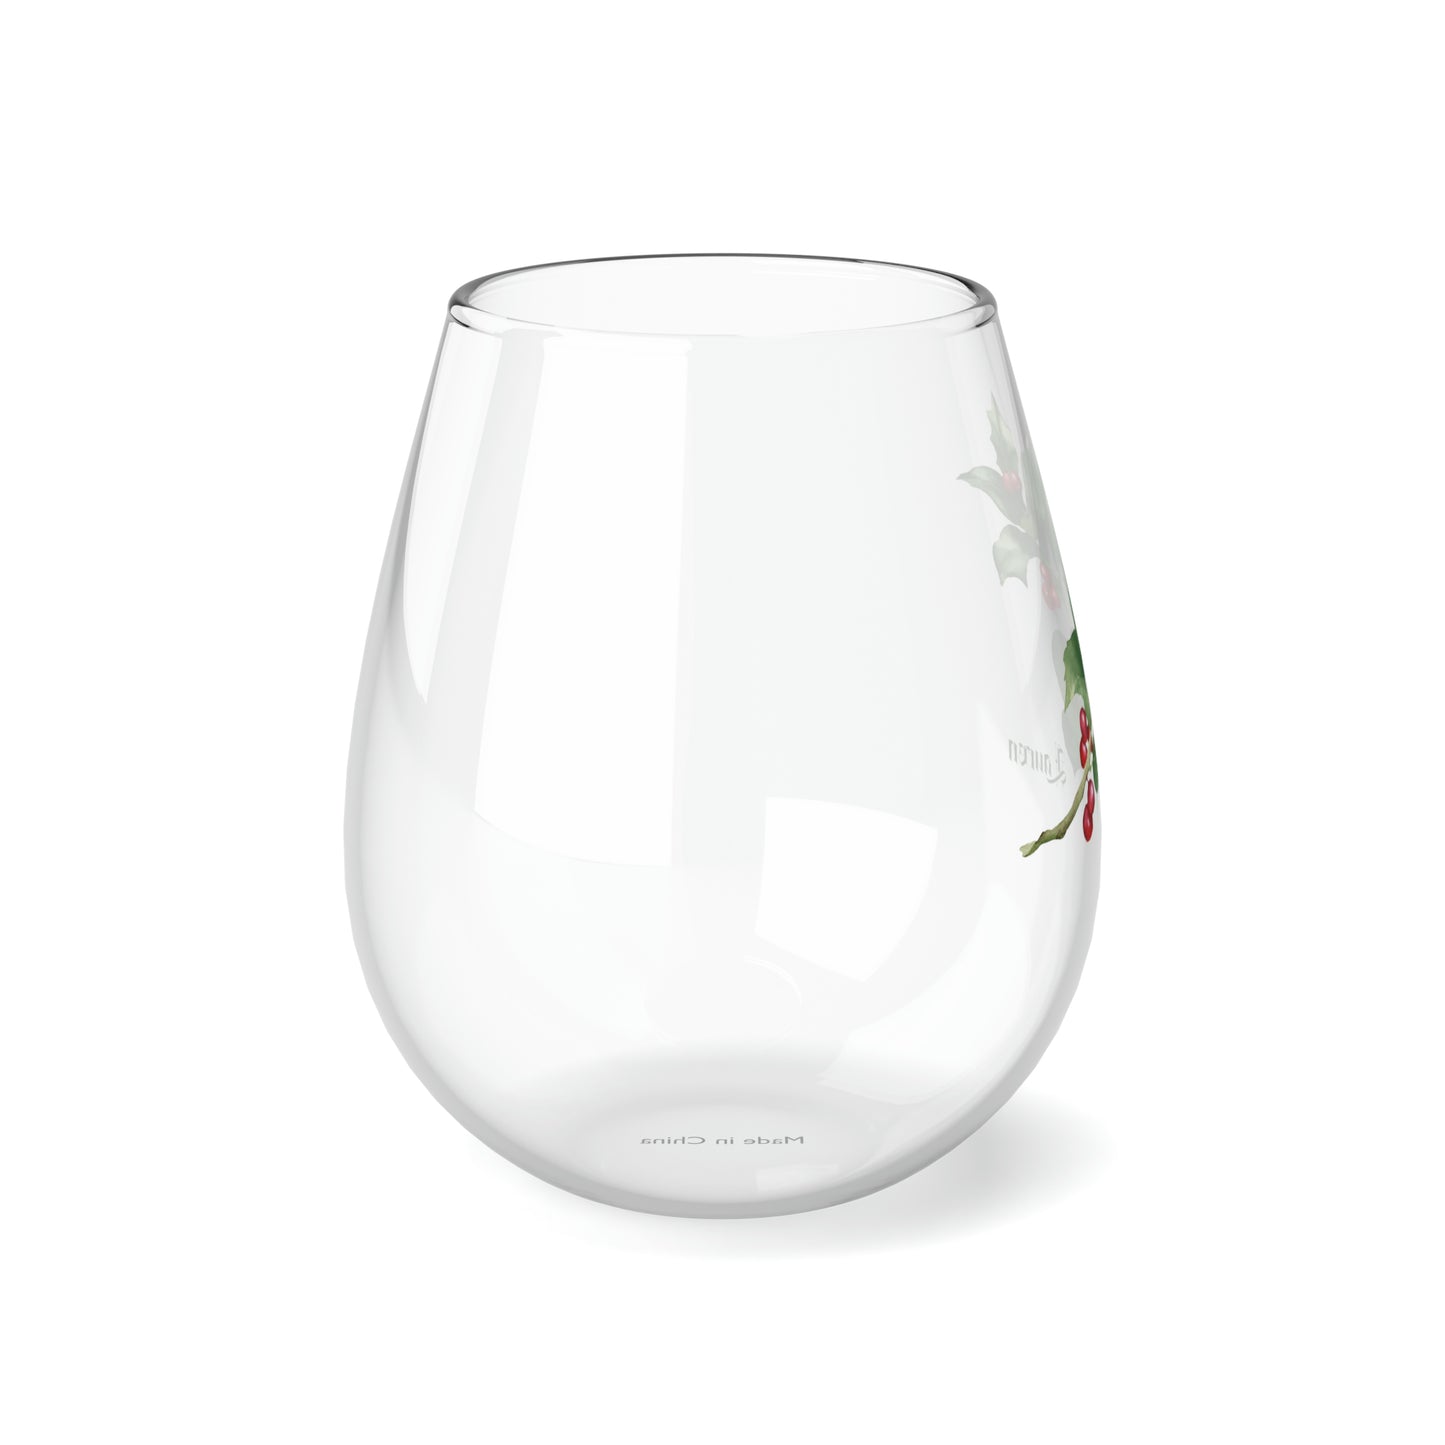 December PERSONALIZED Birth Flower Wine Glass, Birth Flower Gifts, Birth Flower wine glass, Birth Flower Gifts for Women, Gift for coworker, sister gift, birthday gift, Valentine gift, Stemless Wine Glass, 11.75oz